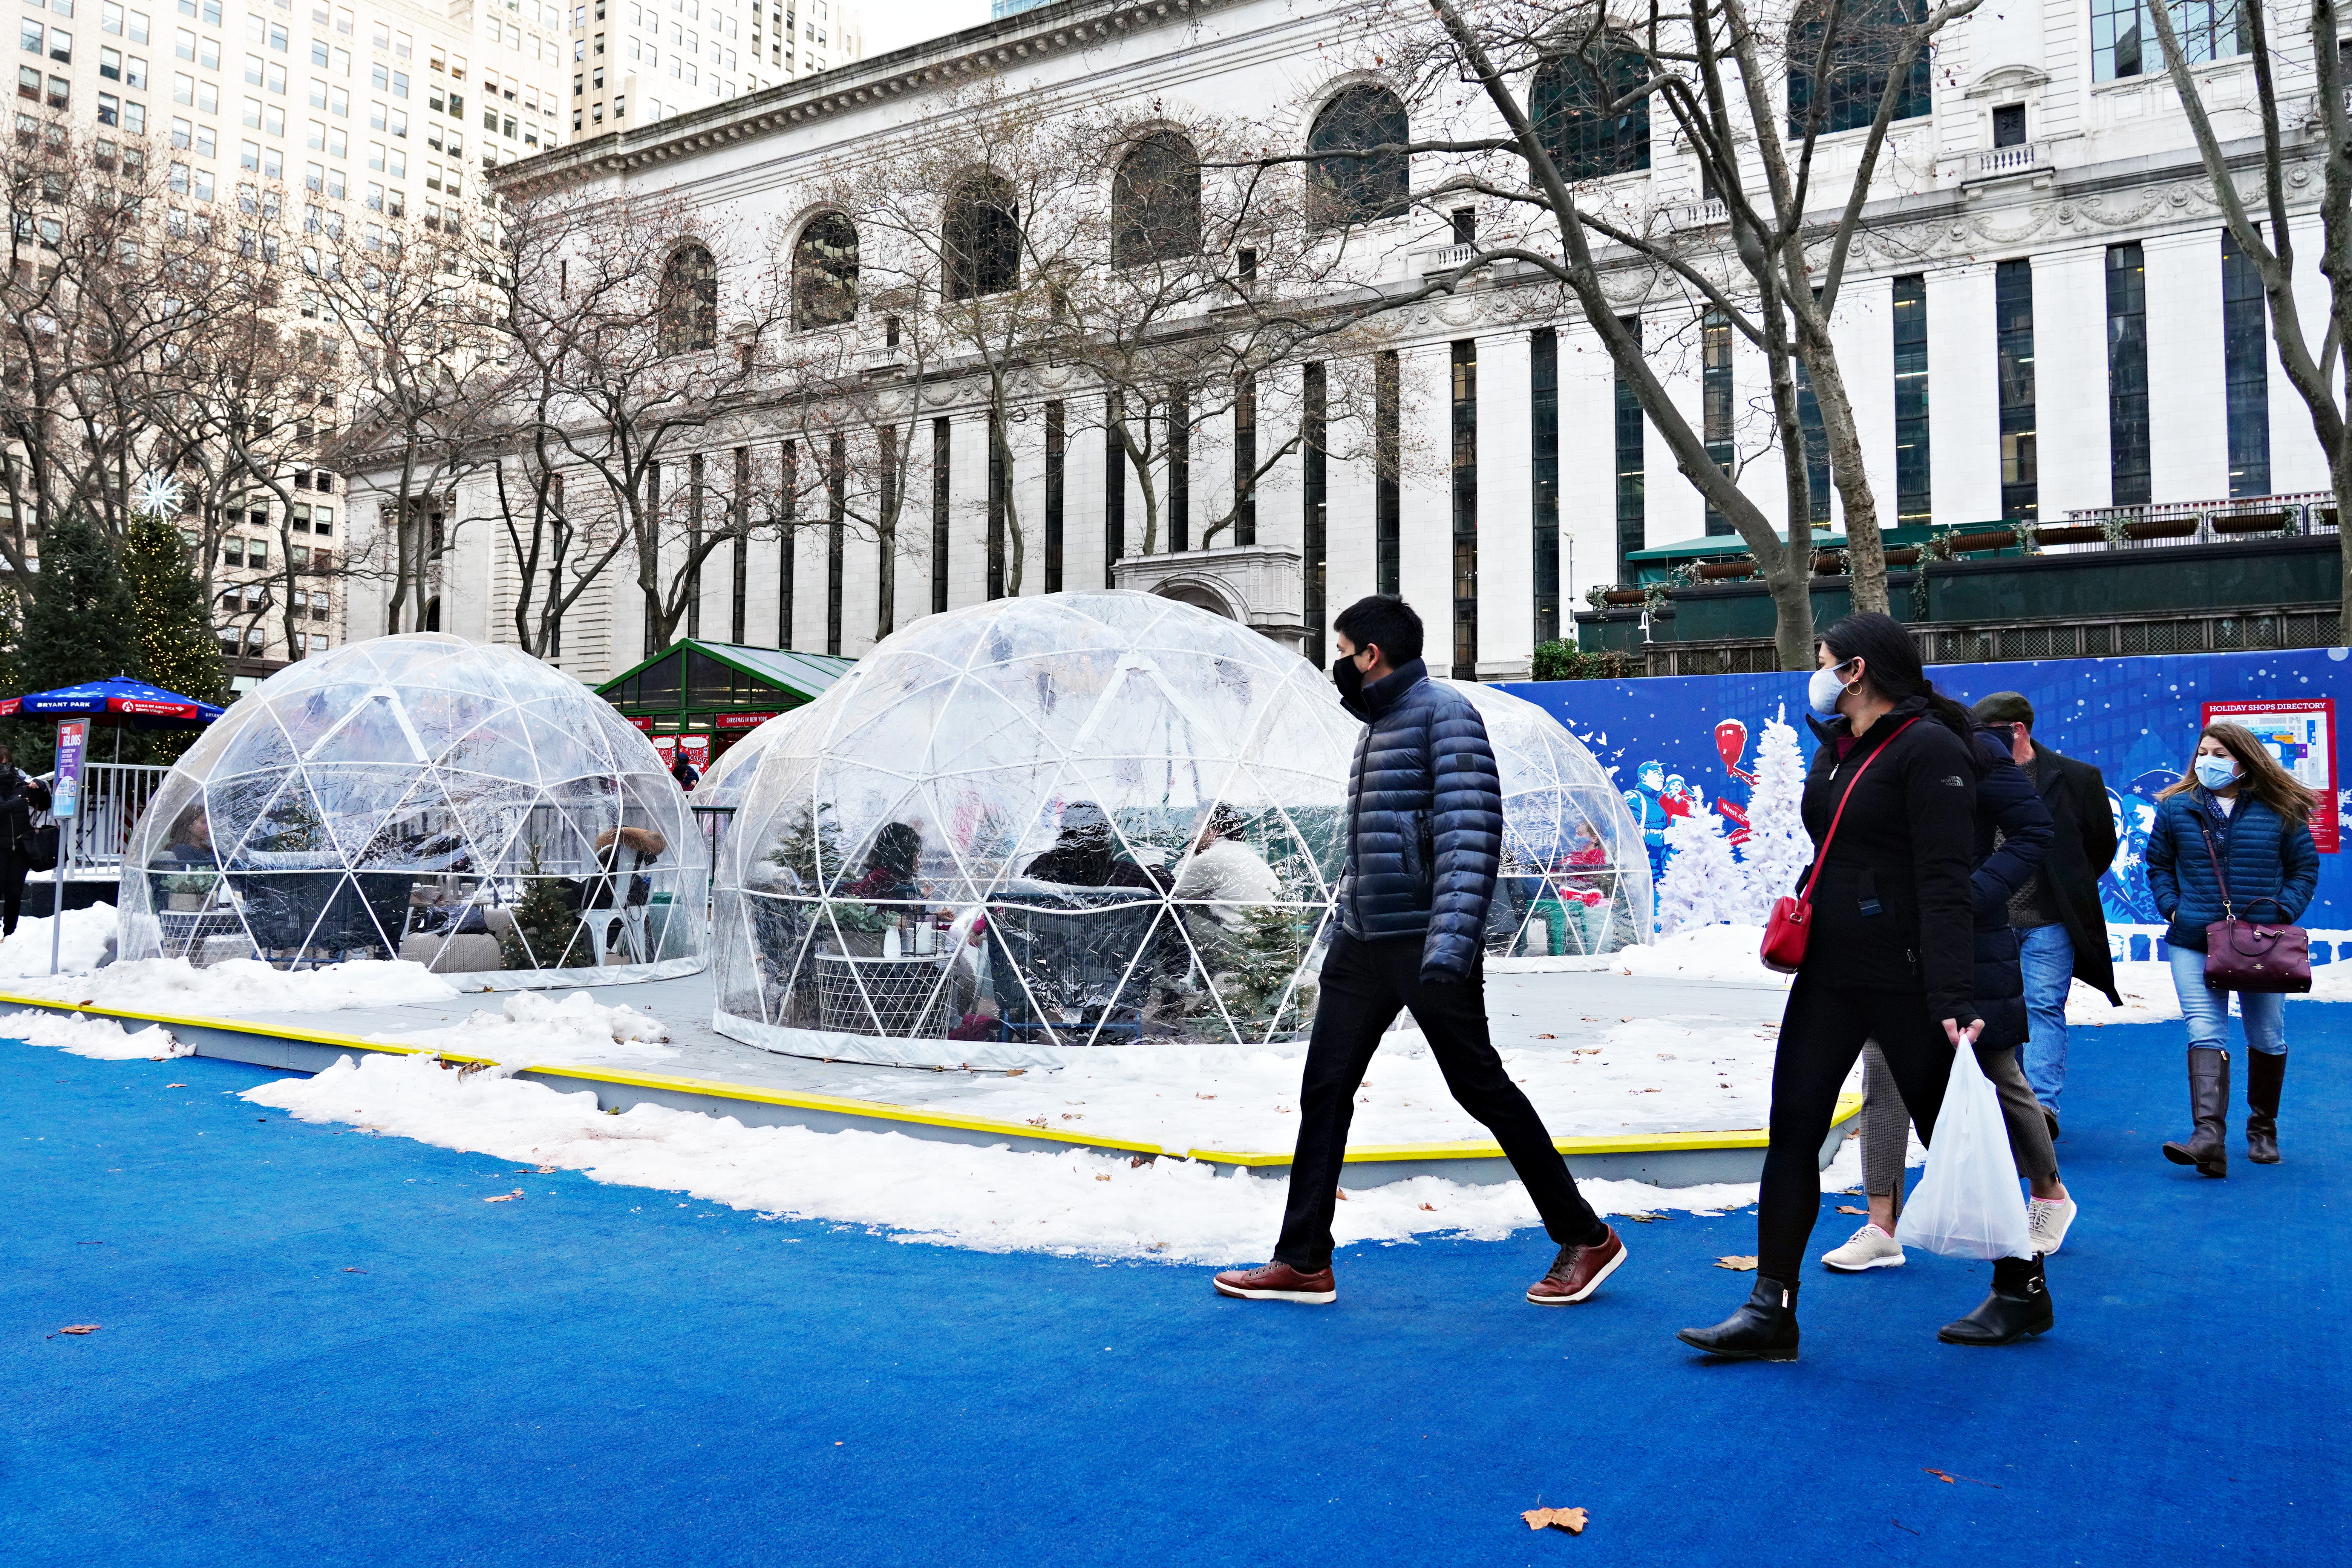 Al fresco foodies: igloo dining tents at Bank of America Winter Village in Bryant Park, New York City